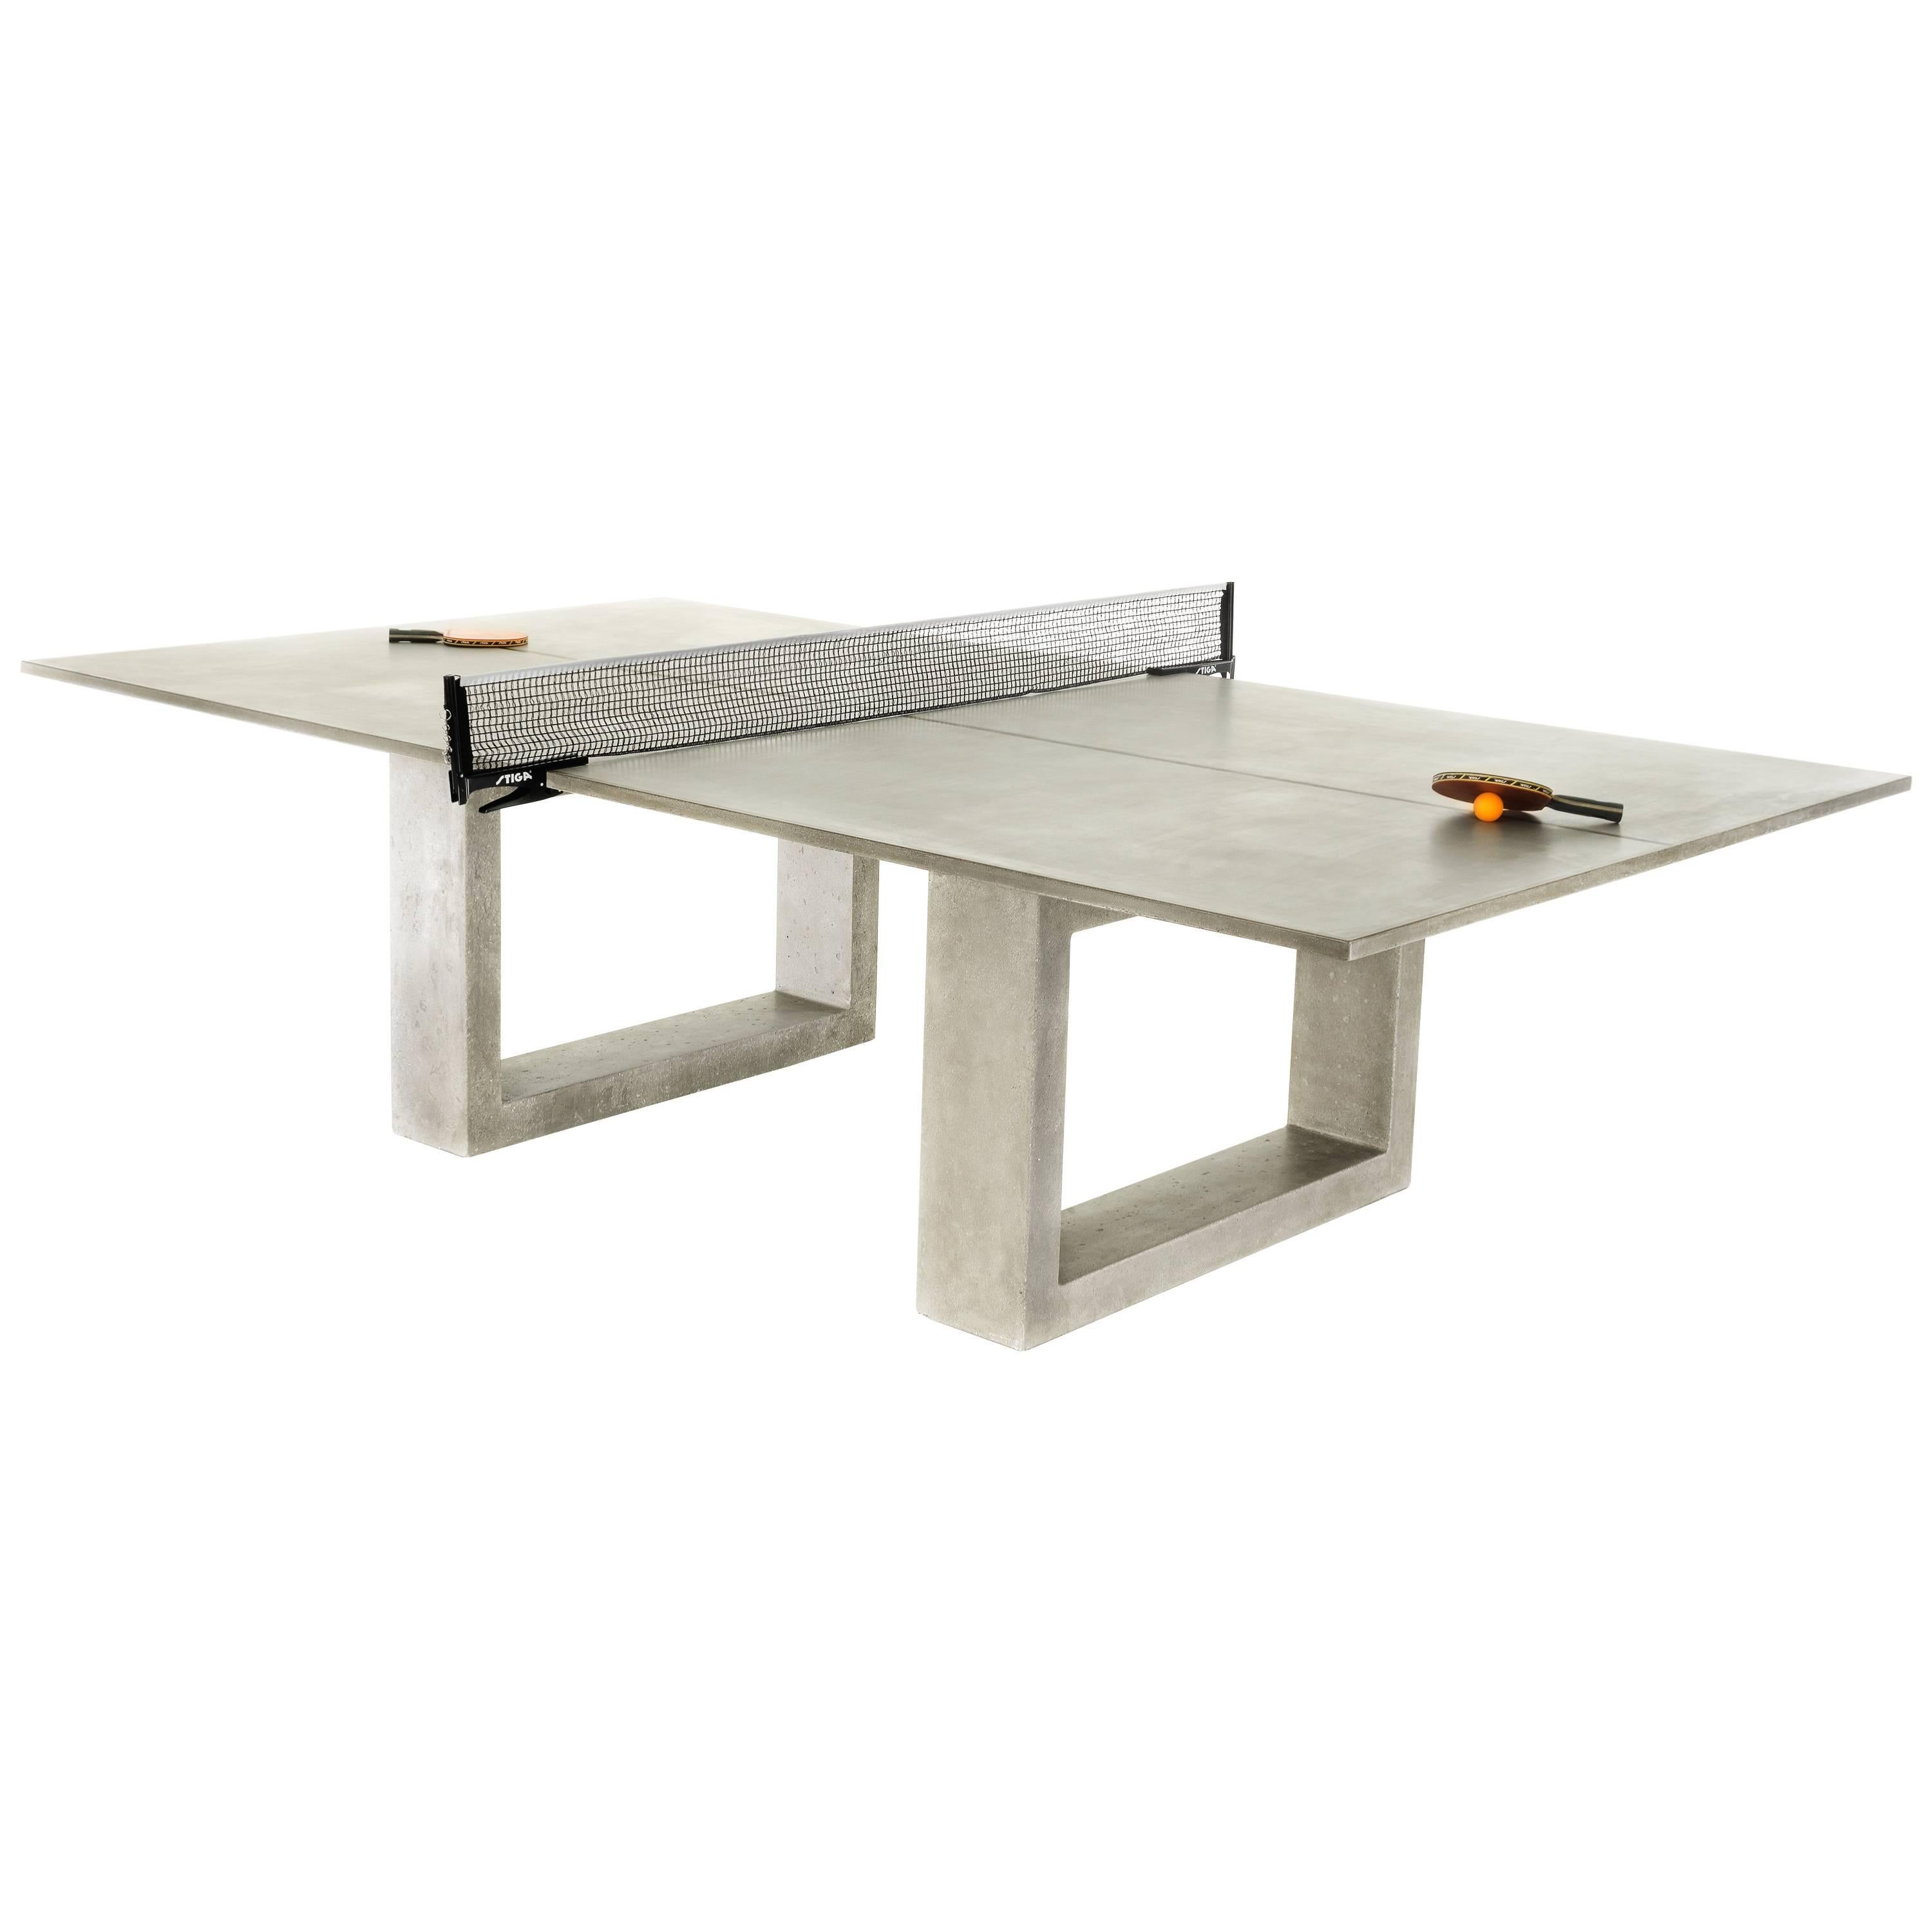 James de Wulf Concrete Ping Pong Table - Light Grey Finish, Available Now